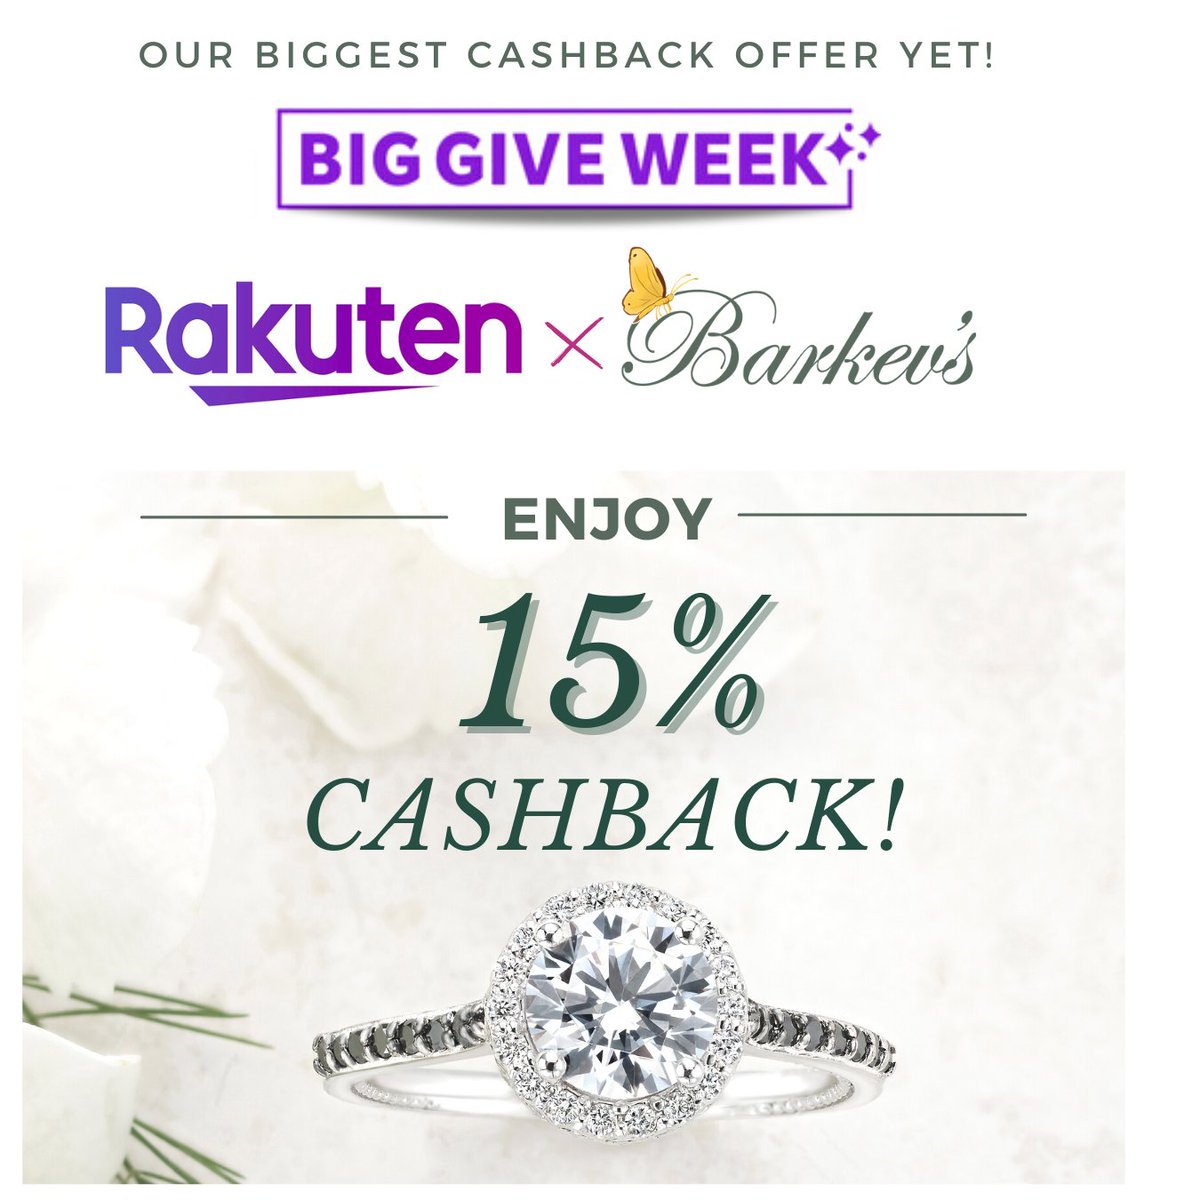 LAST DAY! 🚨🚨 Get 15% CASH BACK on any order with us! 💚

ACTIVATE PROMO on Rakuten here | bit.ly/3L1H1j1 and get your cash back the next day! 

#biggiveweek #Rakuten #MondayMorning #Mondayvibes